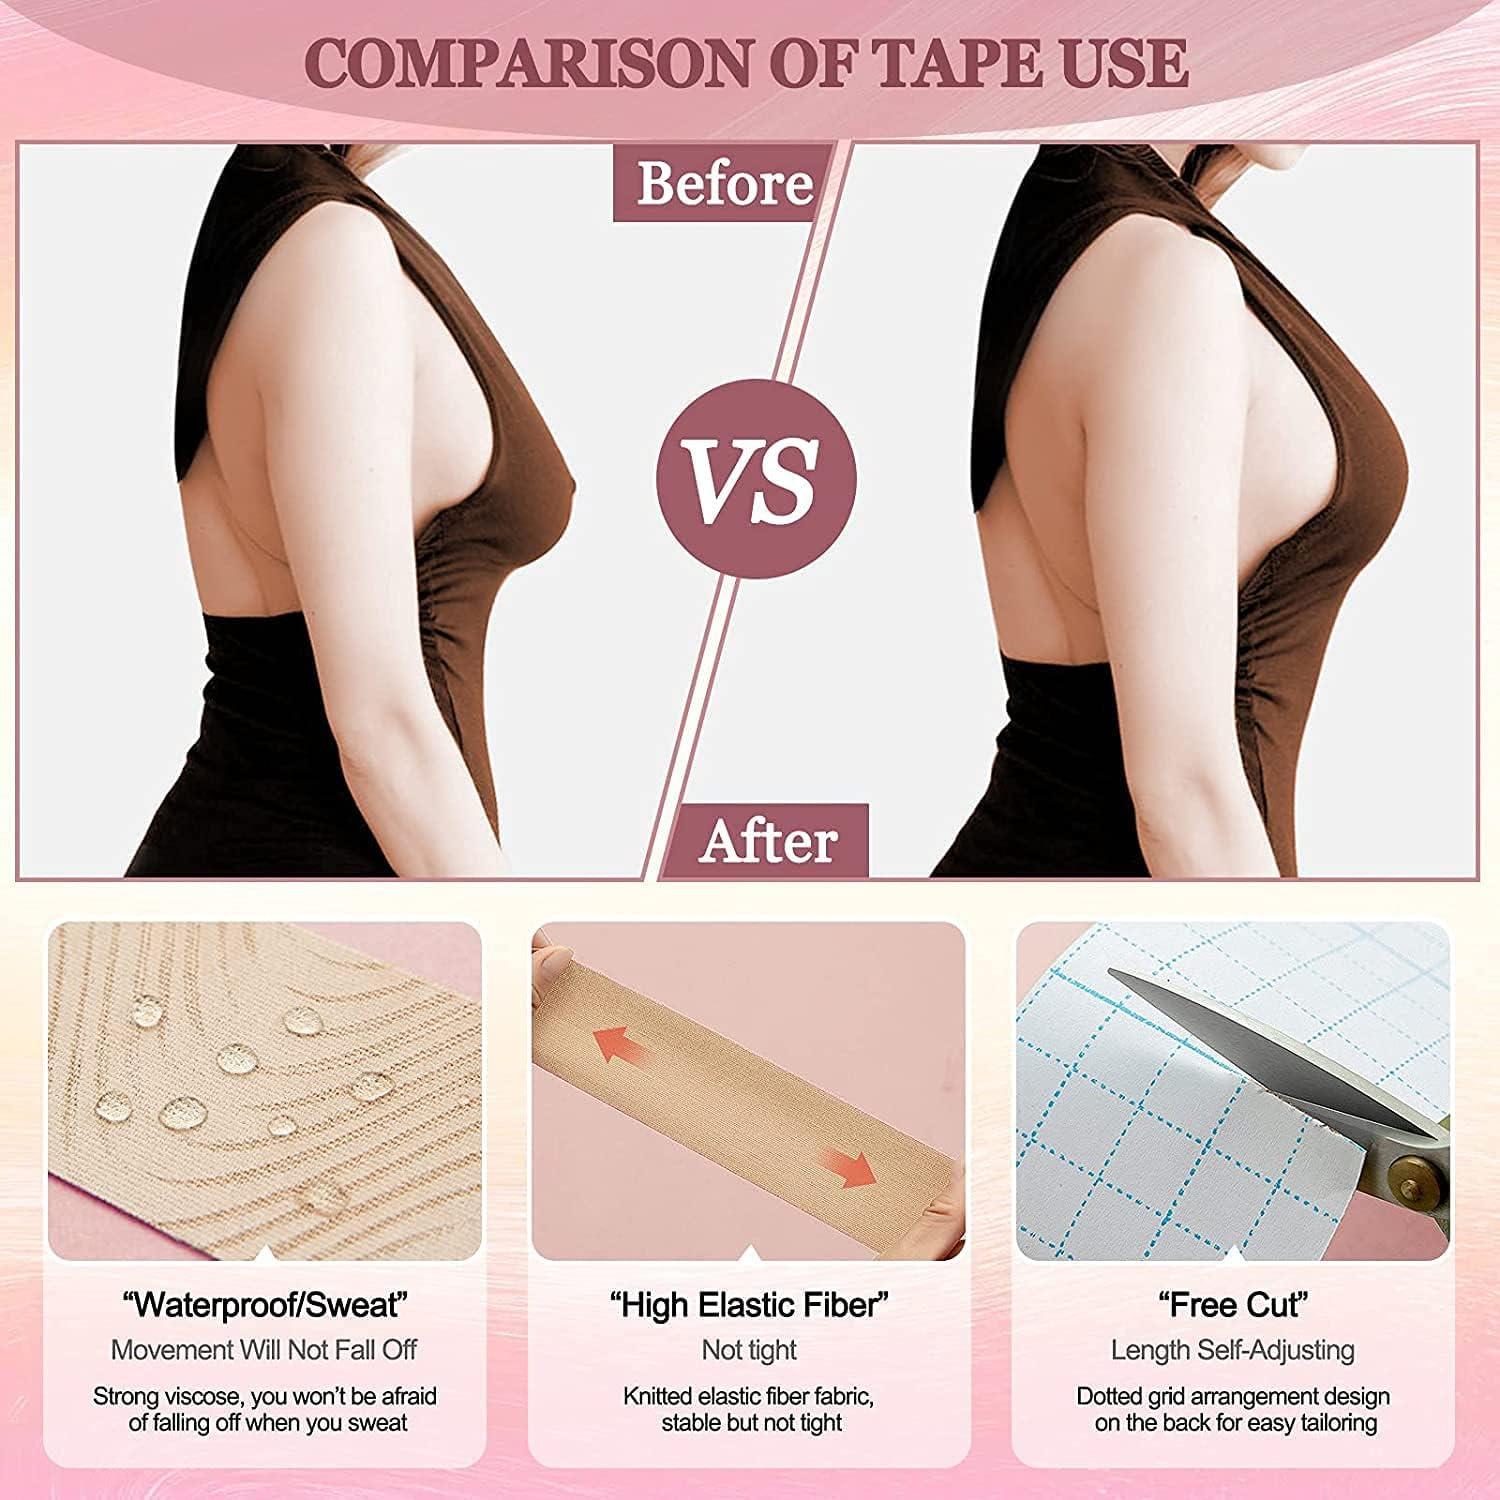 The Original Breast Tape for Women, Latex-Free and Waterproof Body